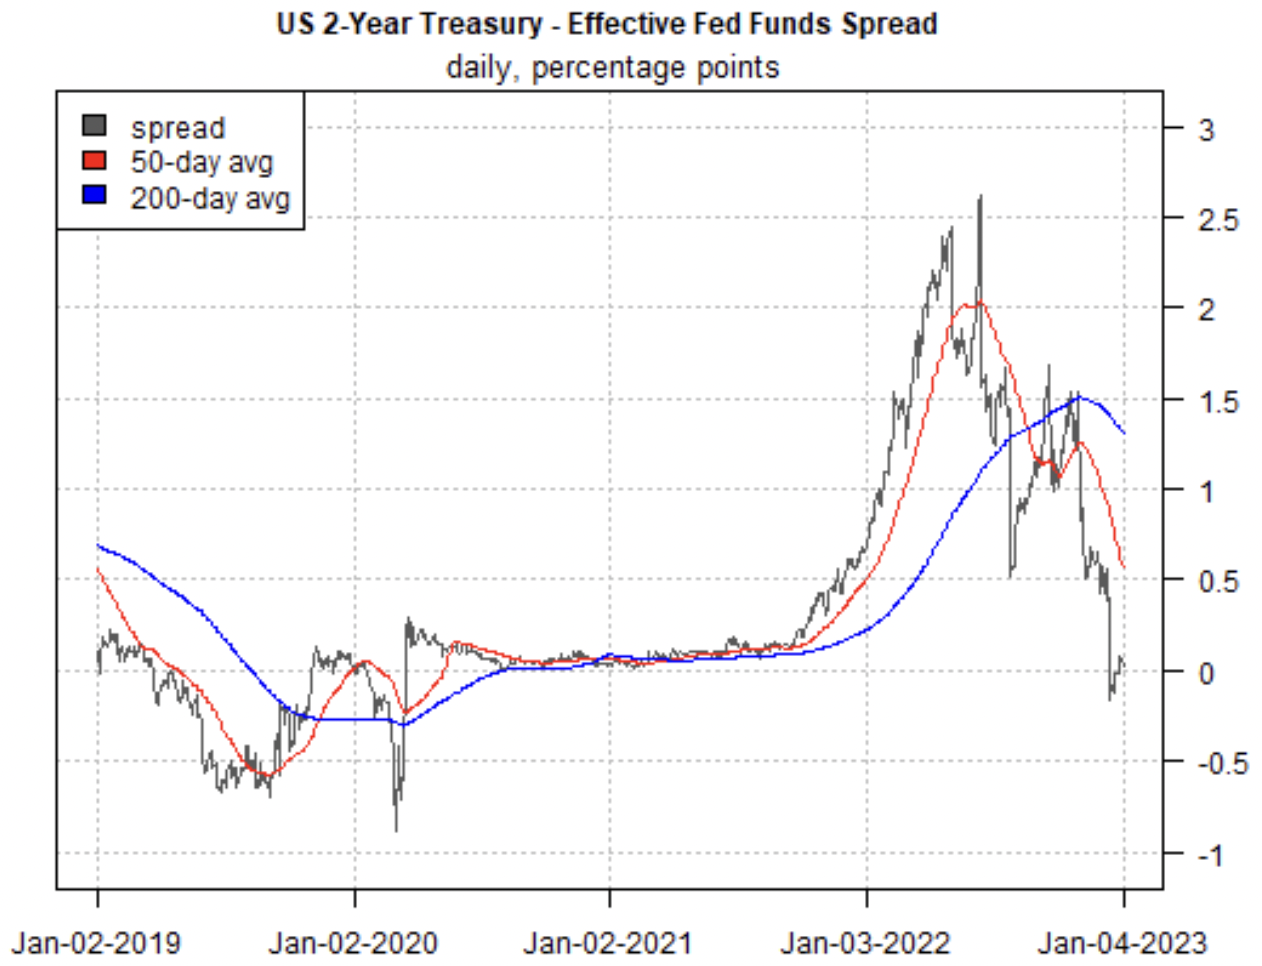 U.S. 2-Year Treasury Yield Less Fed Funds Rate